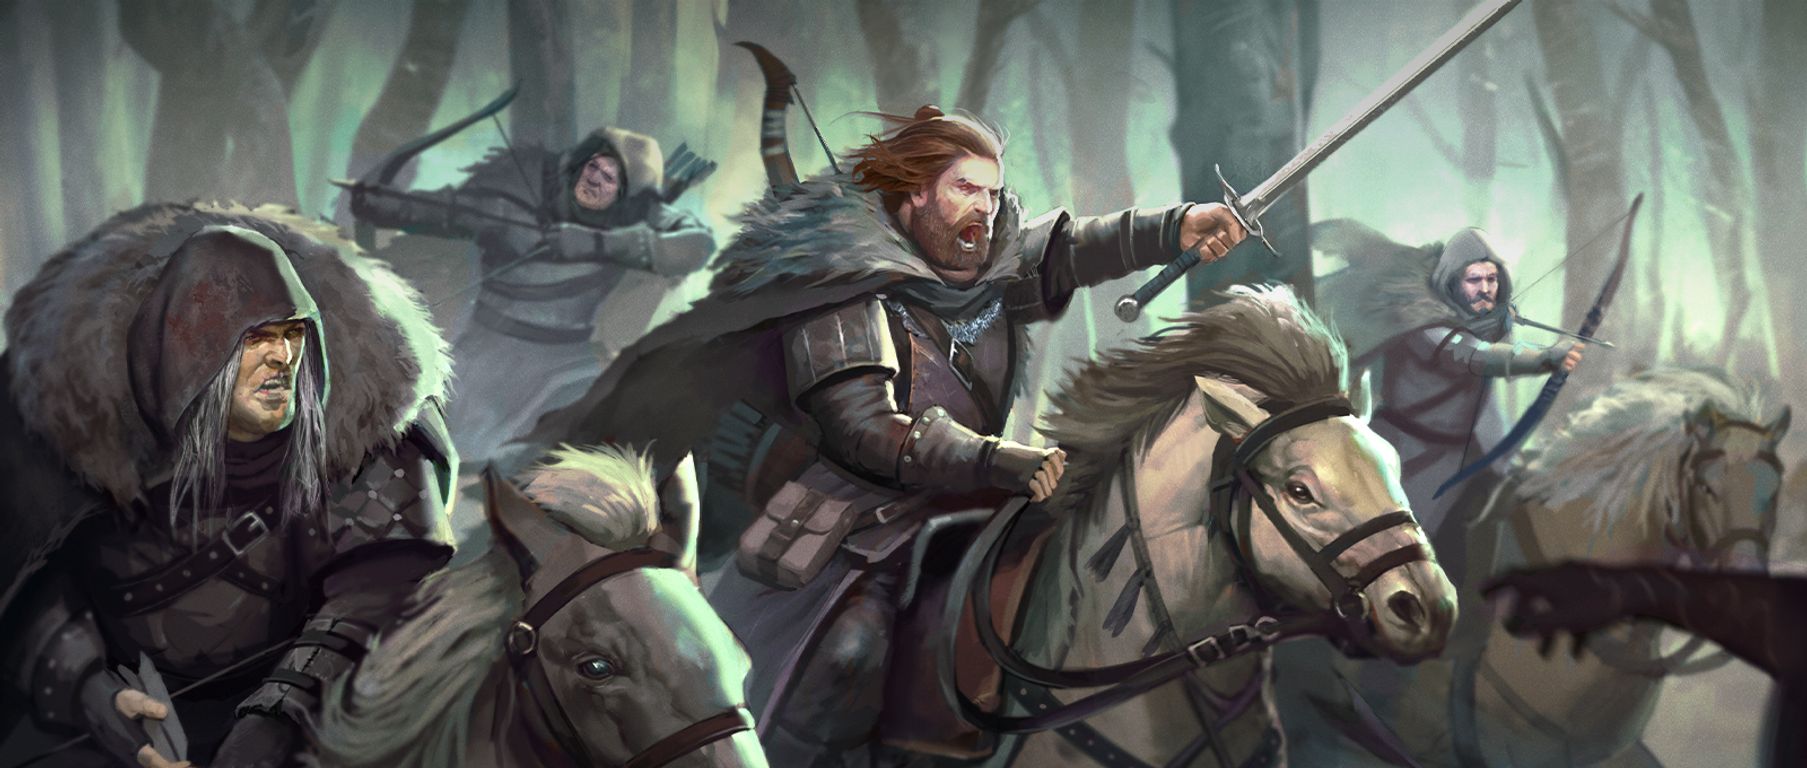 A Song of Ice & Fire: Tabletop Miniatures Game – Ranger Trackers